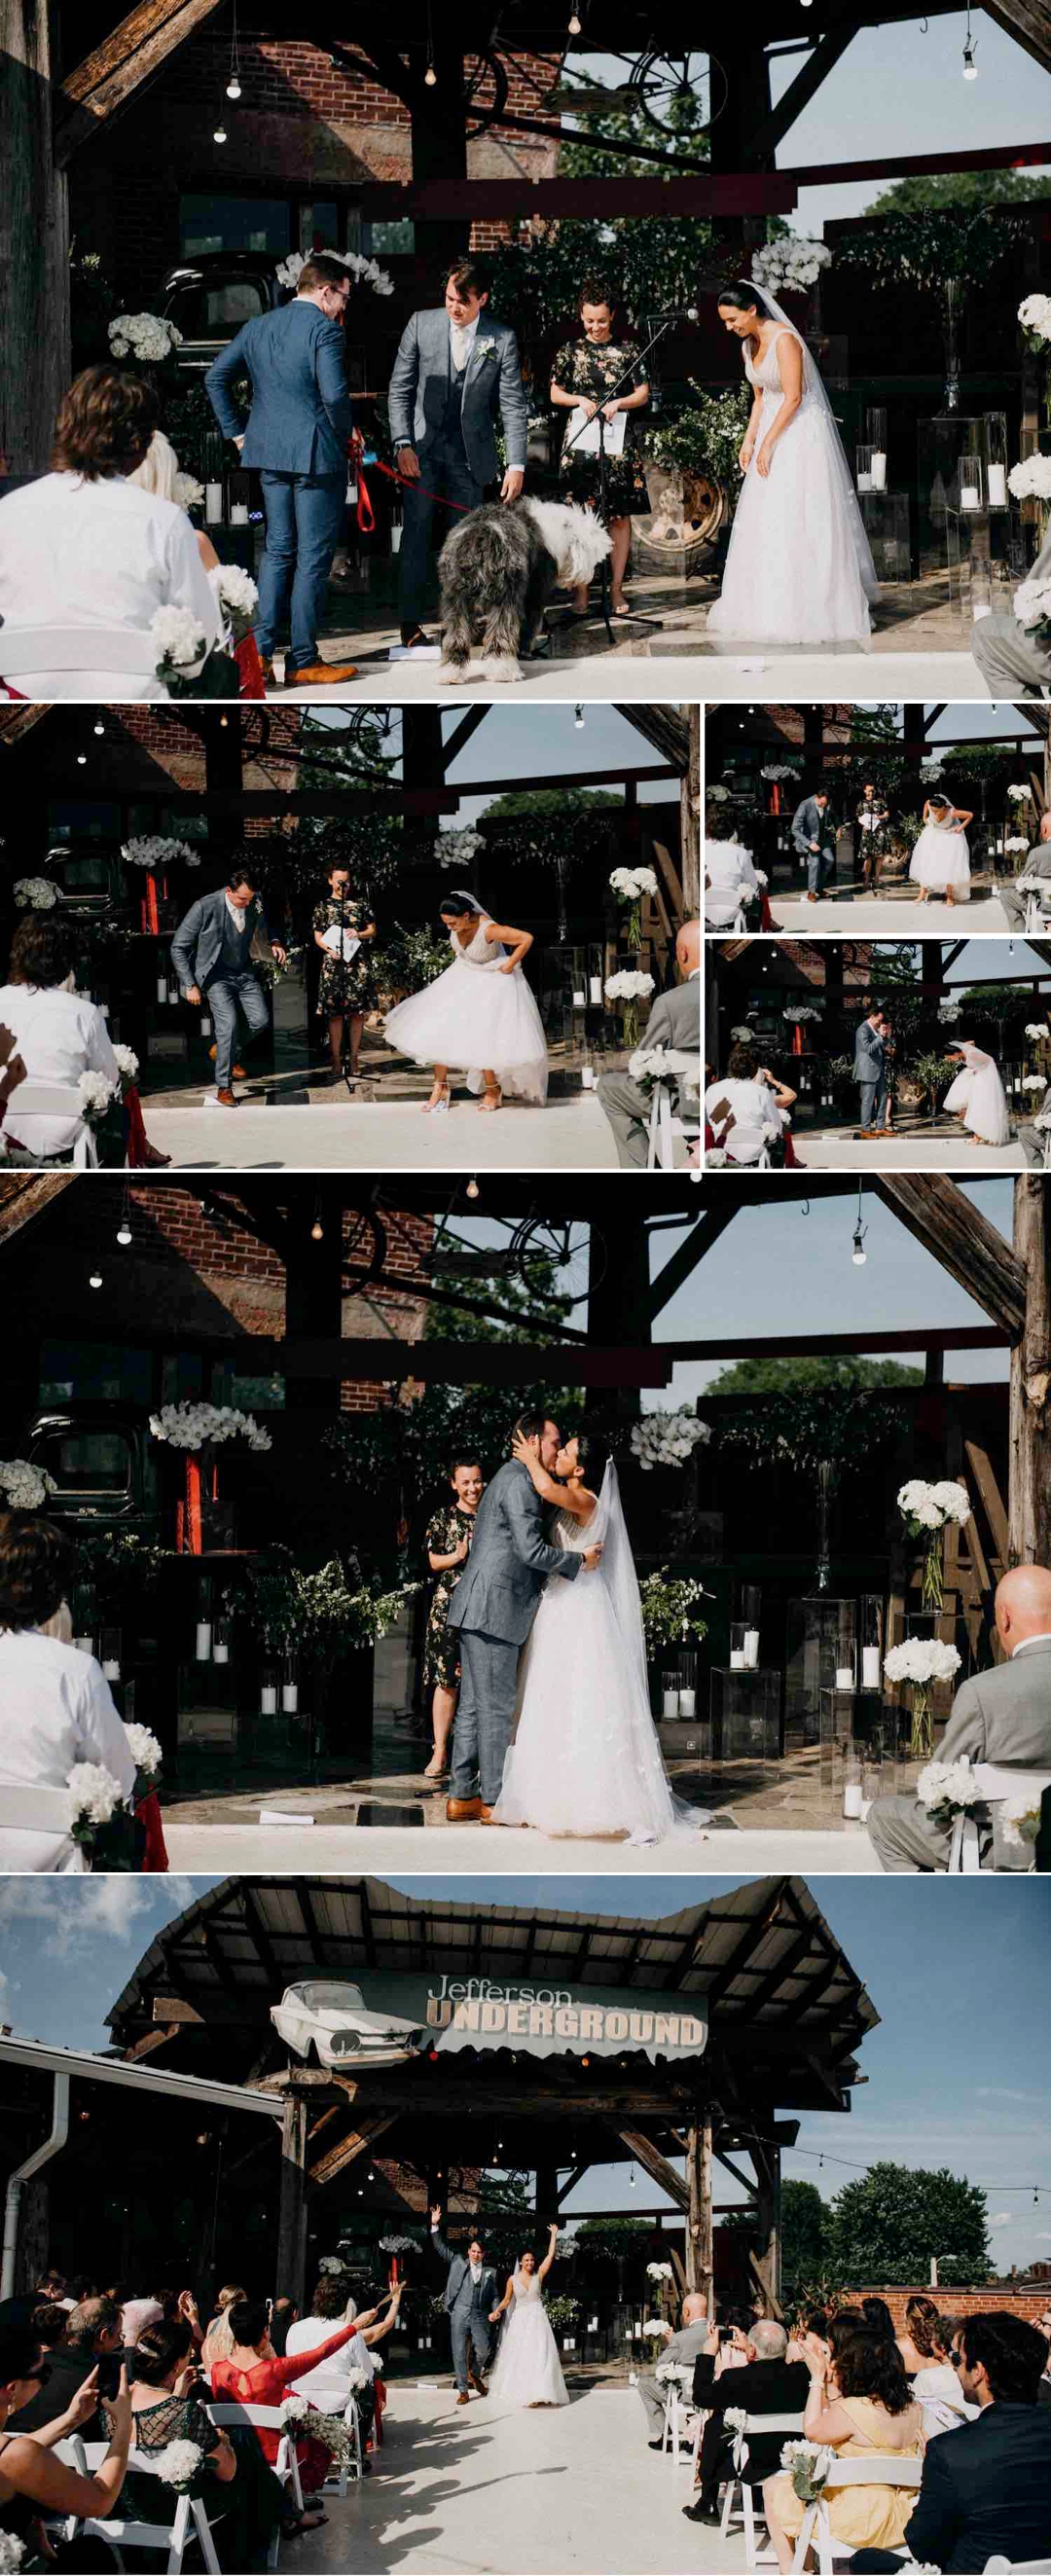 A collage of images of a Catholic Jewish rooftop wedding with a dog at Jefferson Underground 